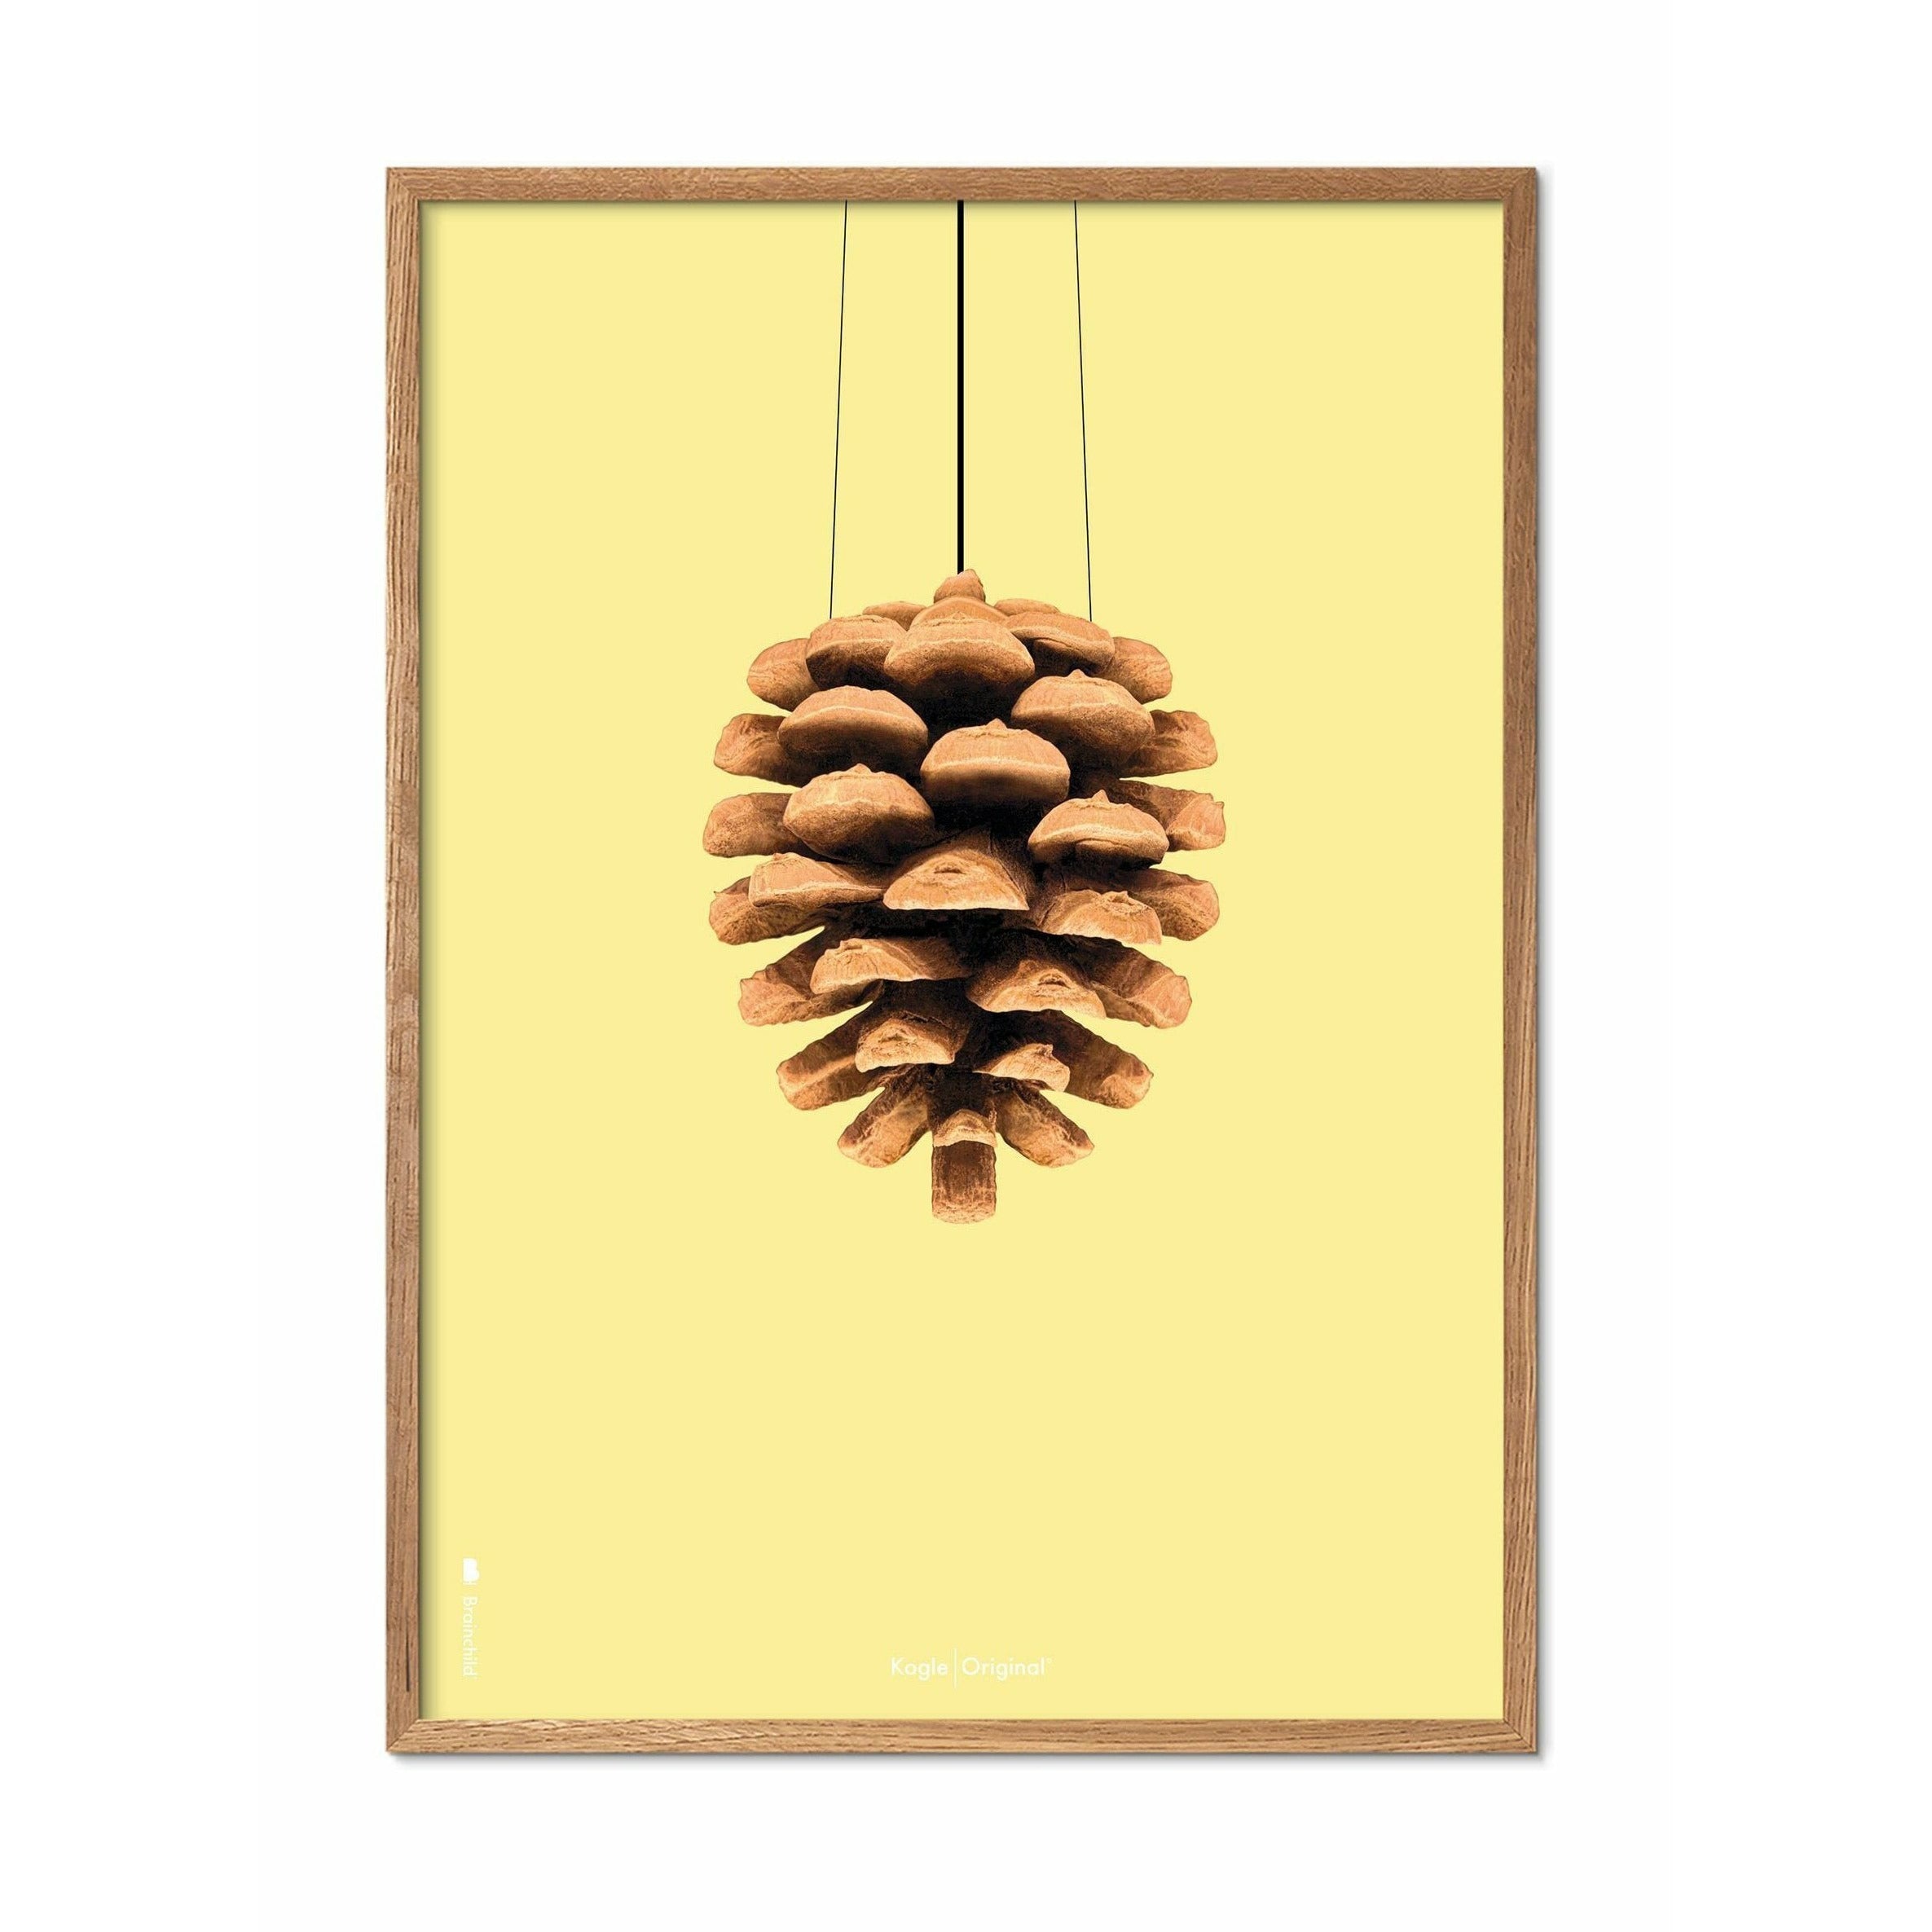 Brainchild Pine Cone Classic Poster, Frame Made Of Light Wood 50x70 Cm, Yellow Background